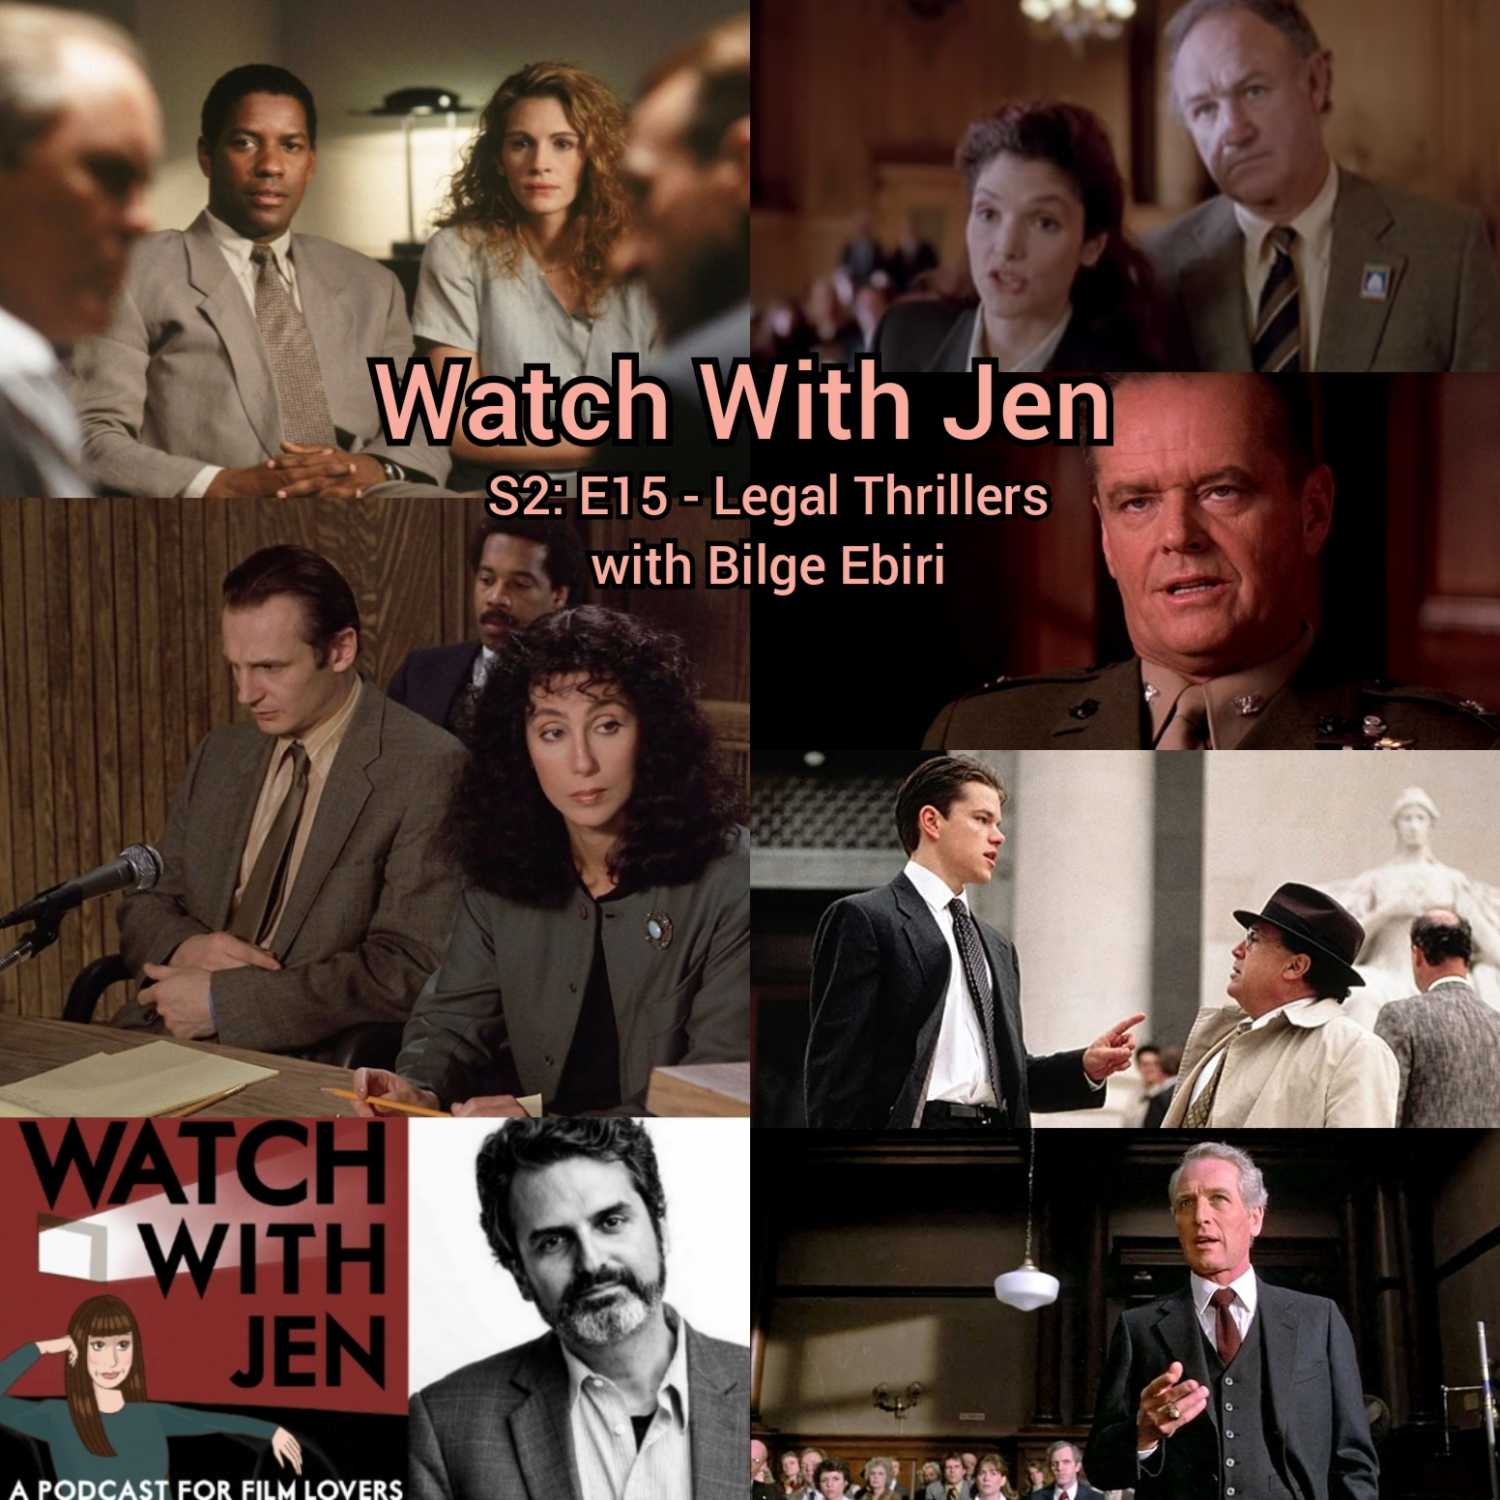 Watch With Jen - S2: E15 - Legal Thrillers with Bilge Ebiri